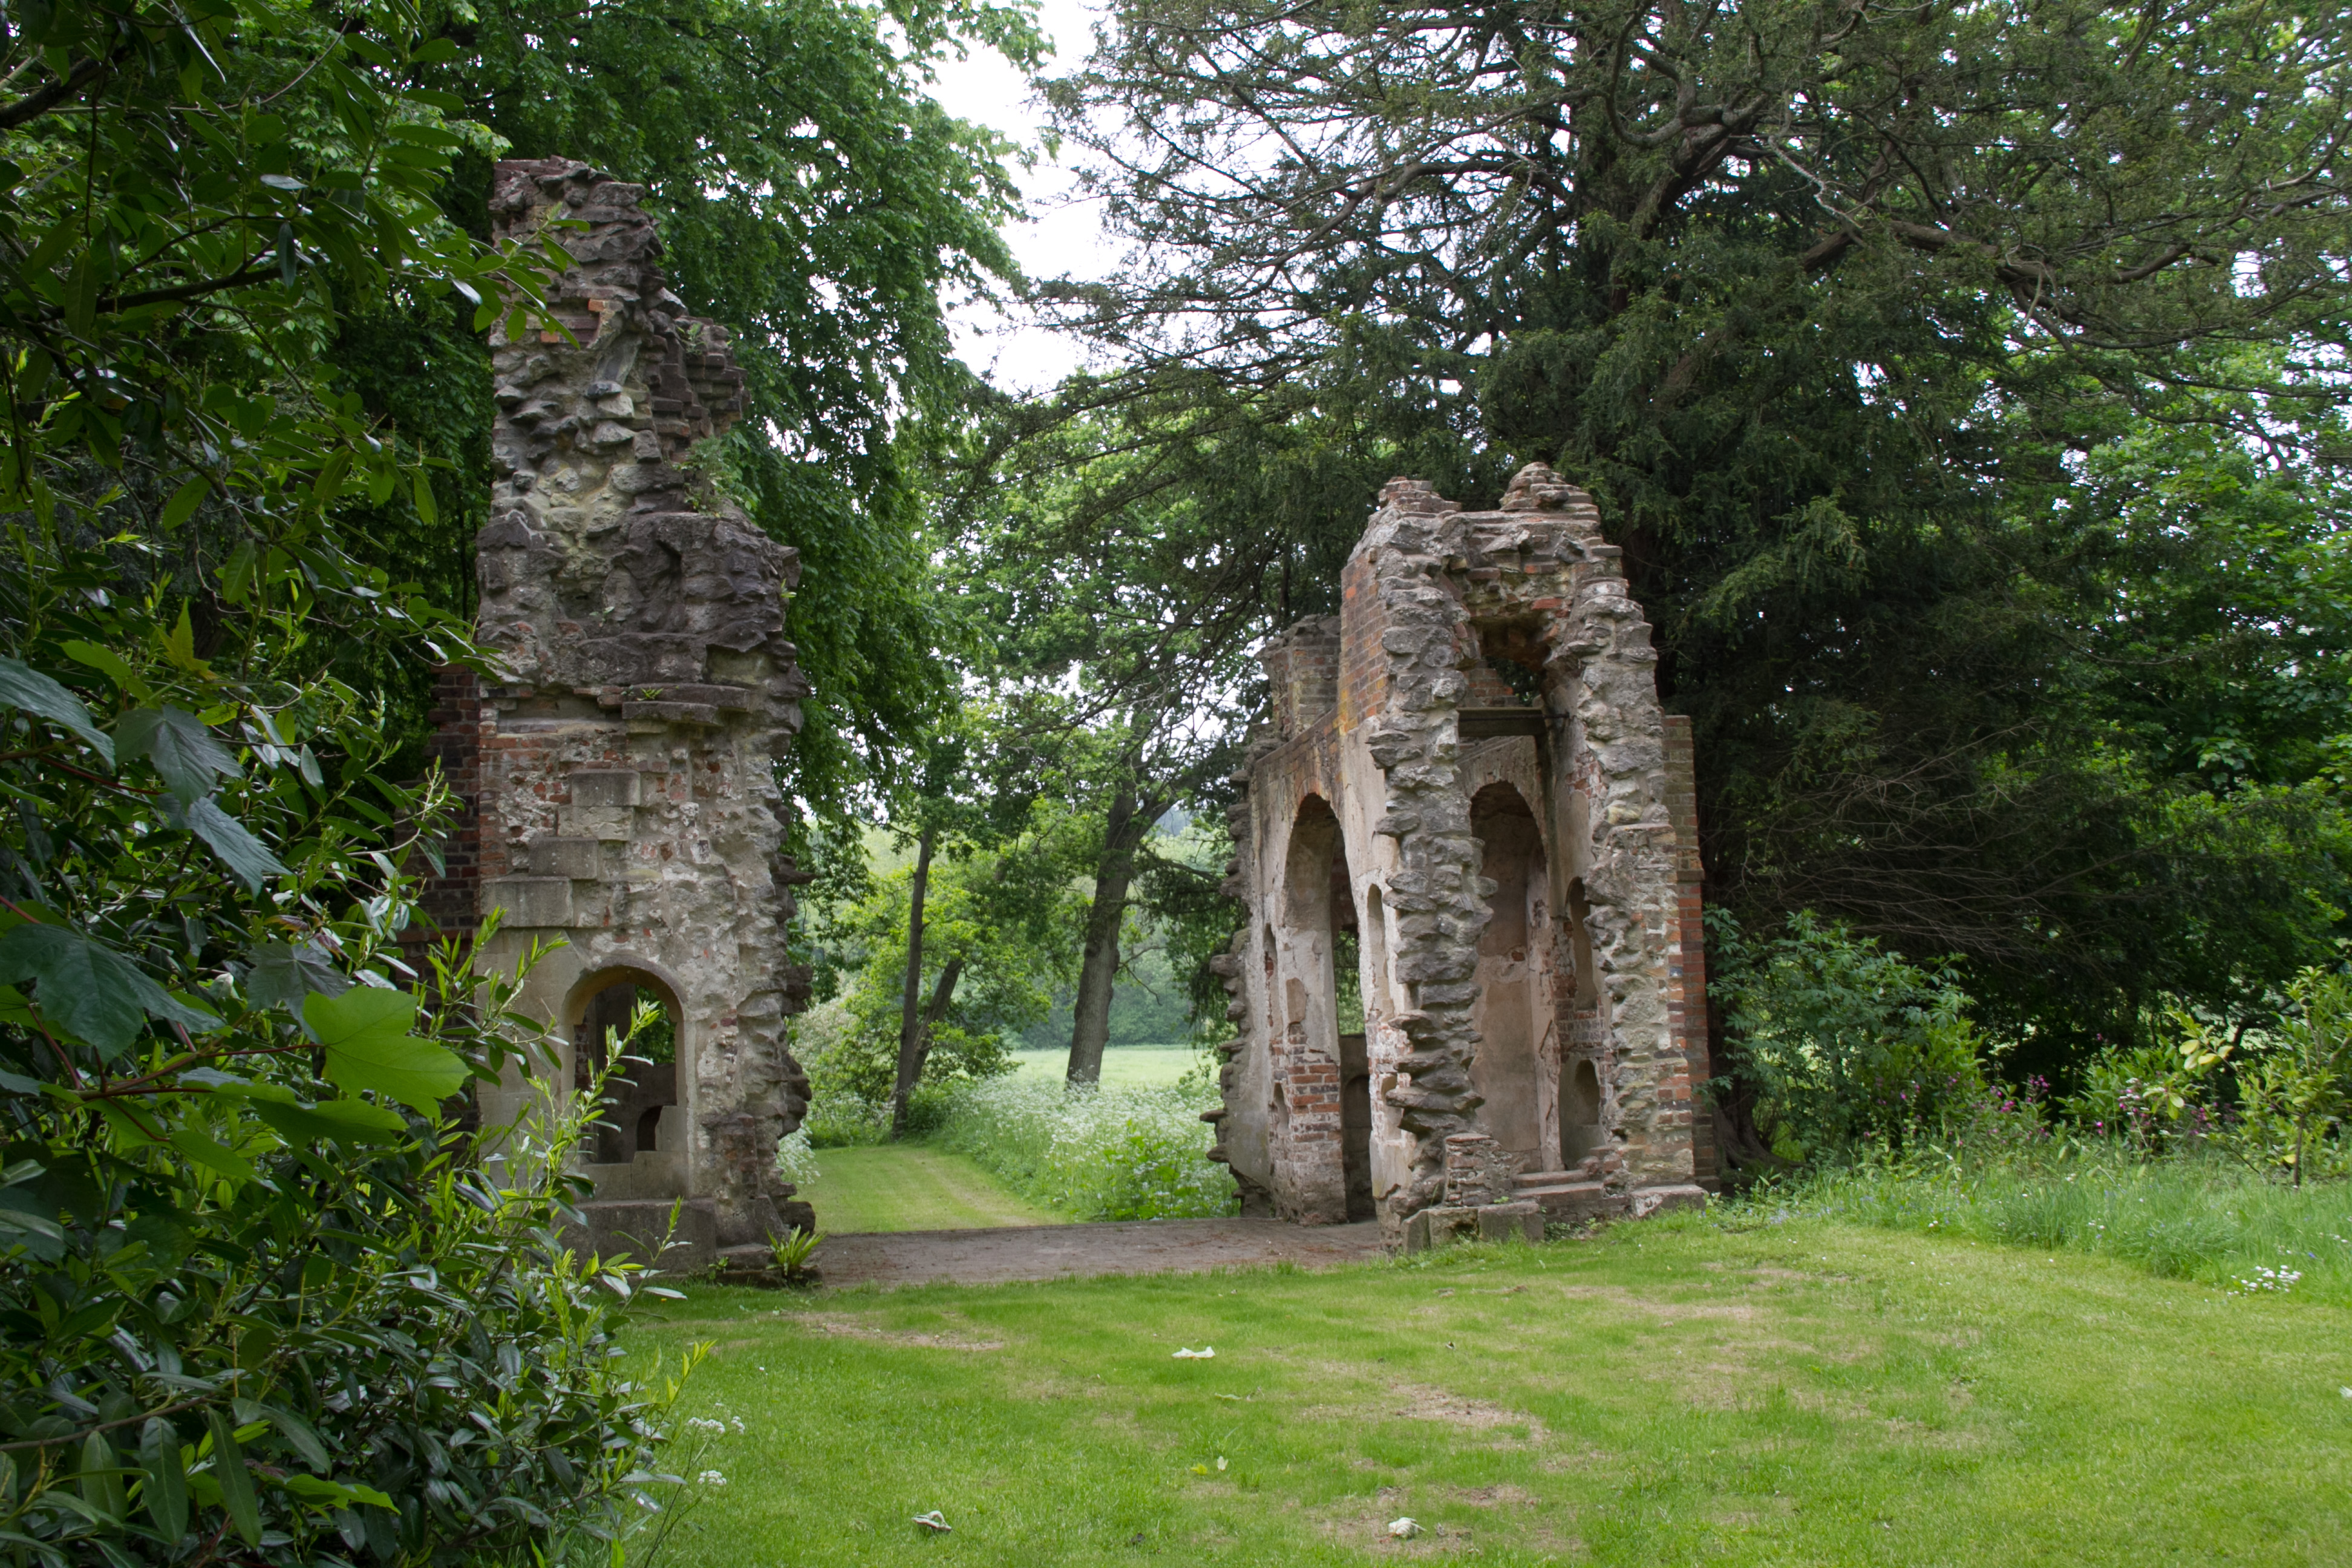 A triumphal arch, Roman style, was part of the landscape at Painshill, an early 18th century garden in England. 